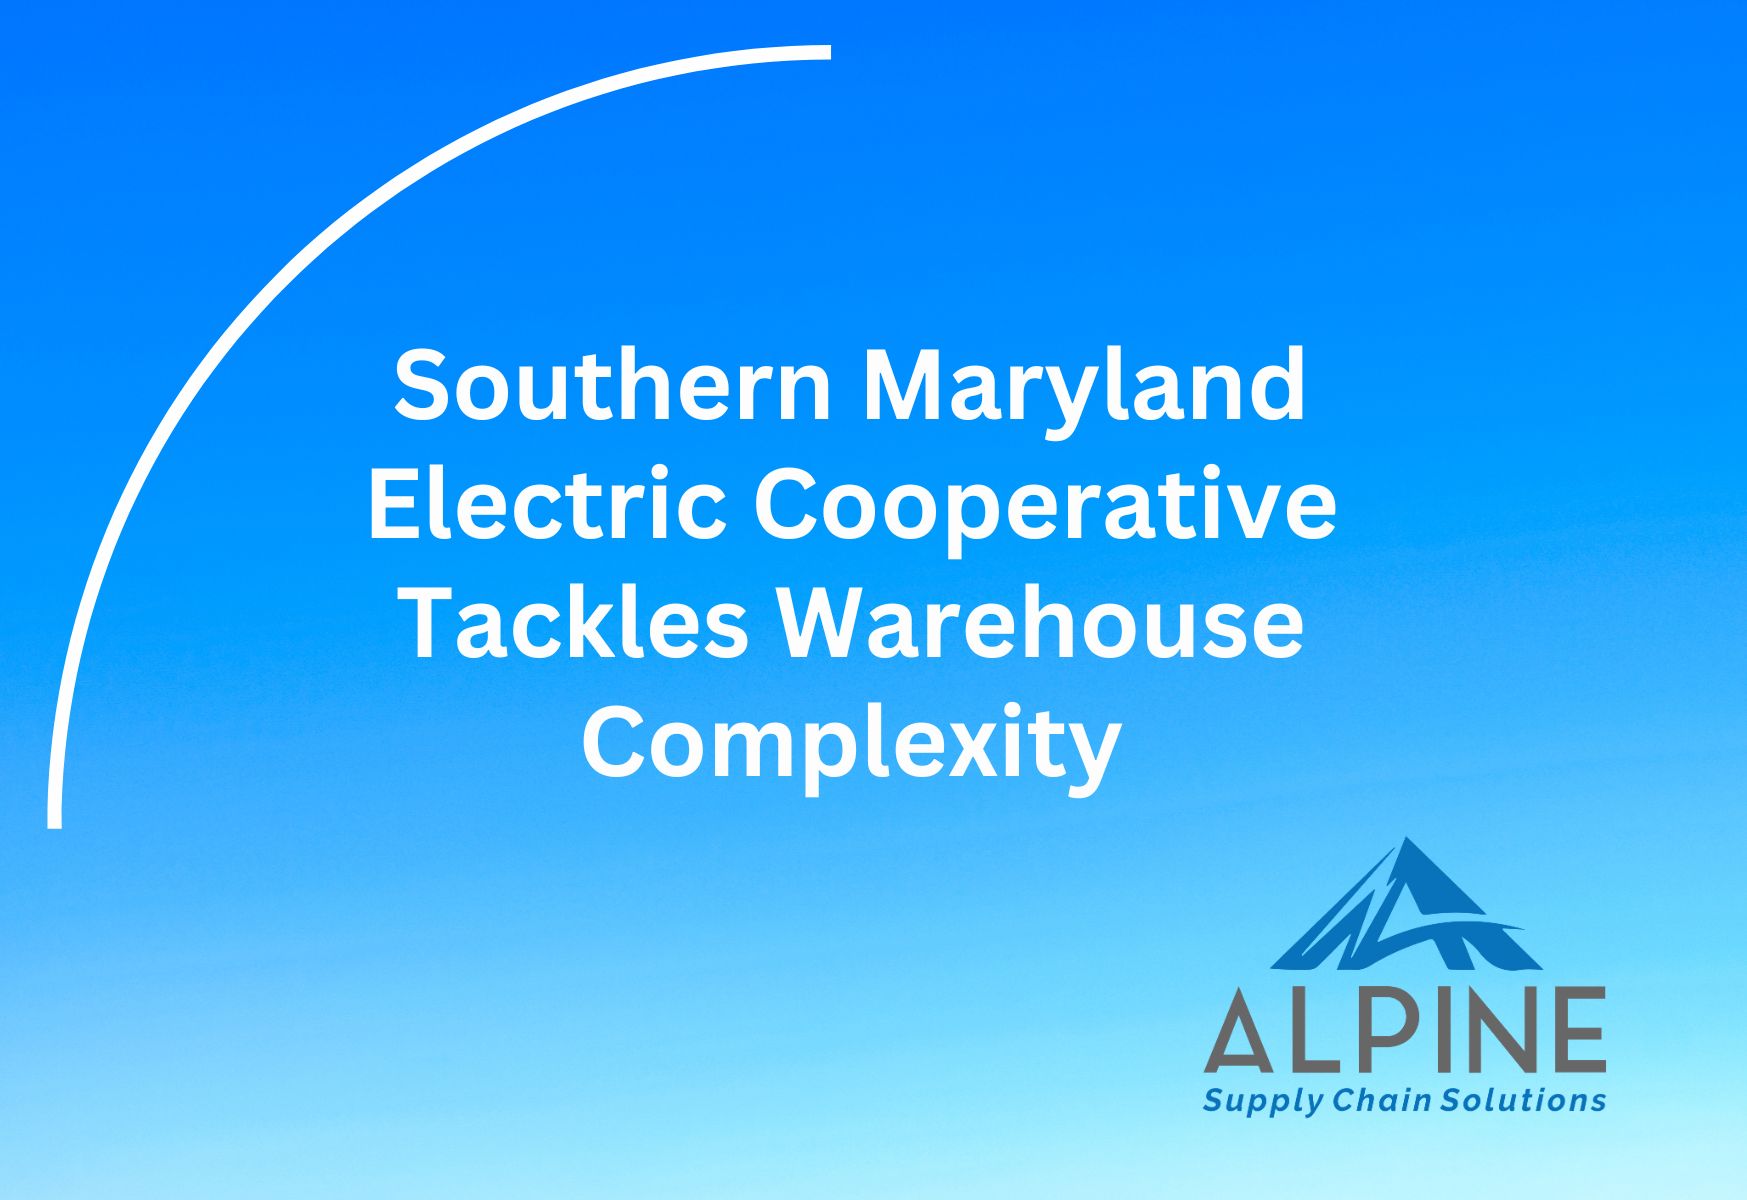 Southern Maryland Electric Cooperative Tackles Warehouse Complexity